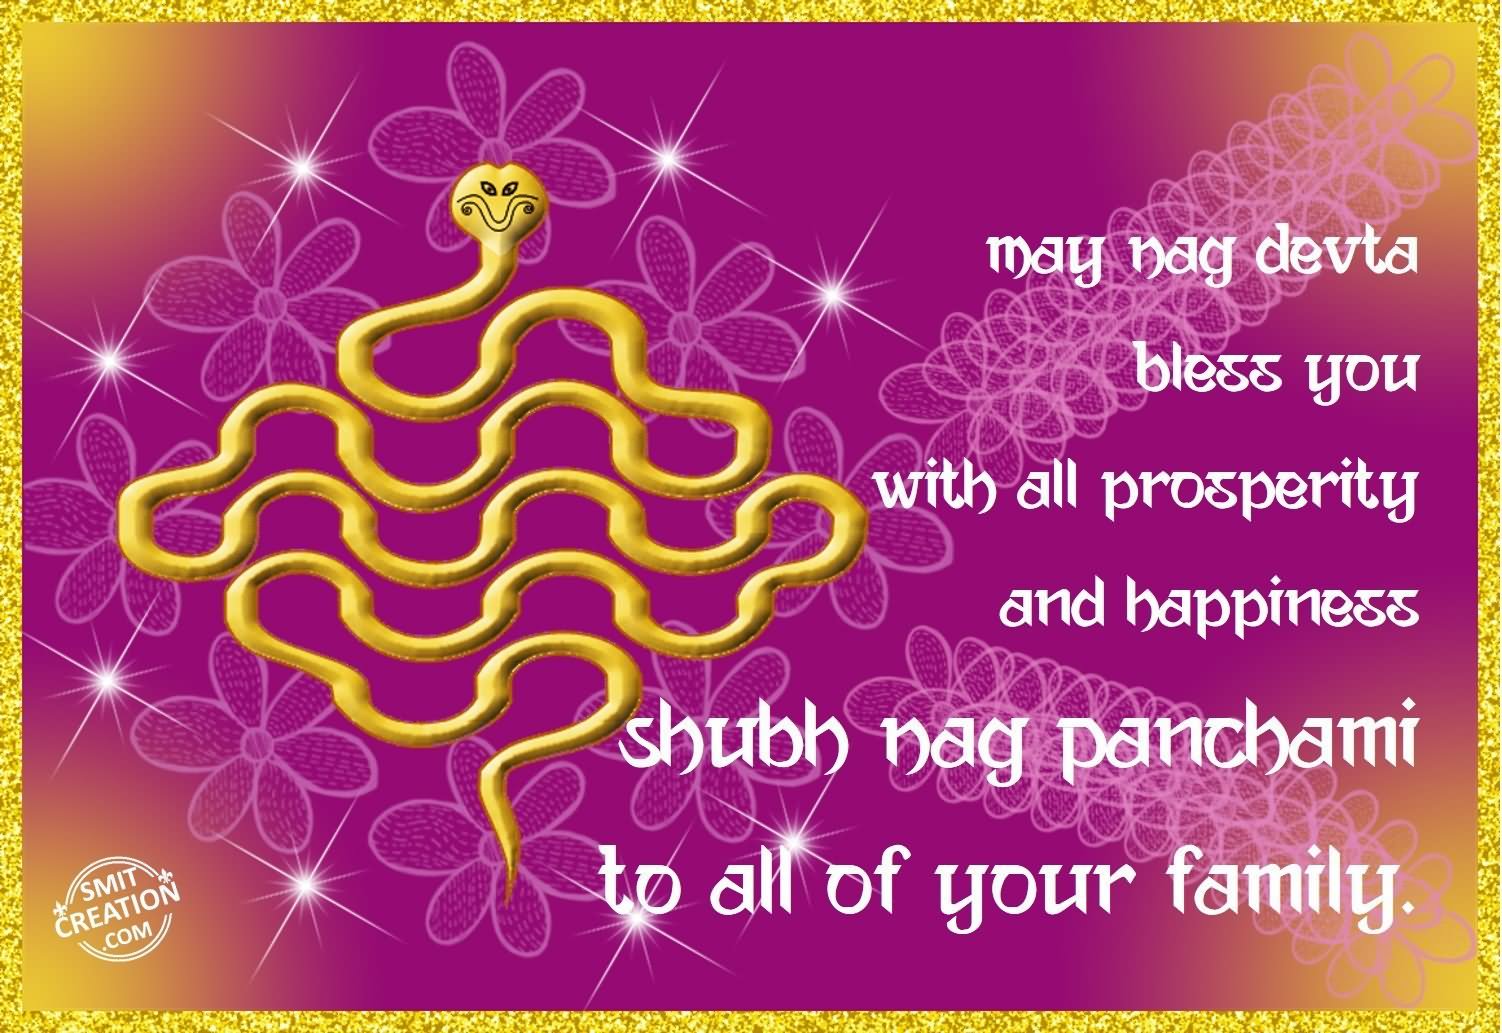 May Nag Devta Bless You With All Prosperity And Happiness Shubh Nag Panchami To All Of Your Family